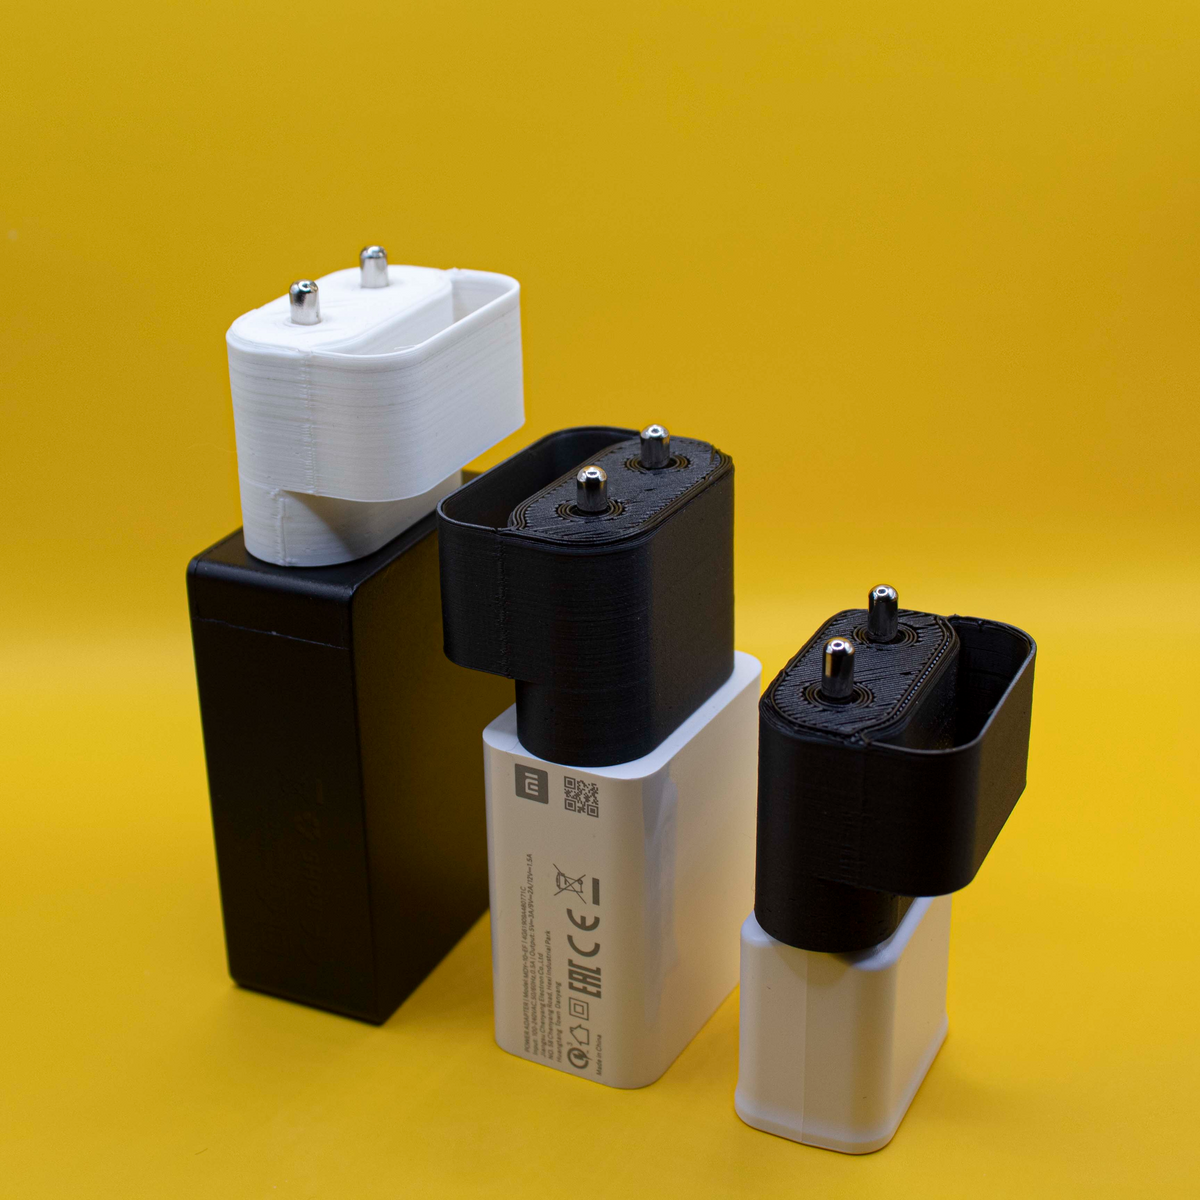 Cable Holder - EU Type Chargers